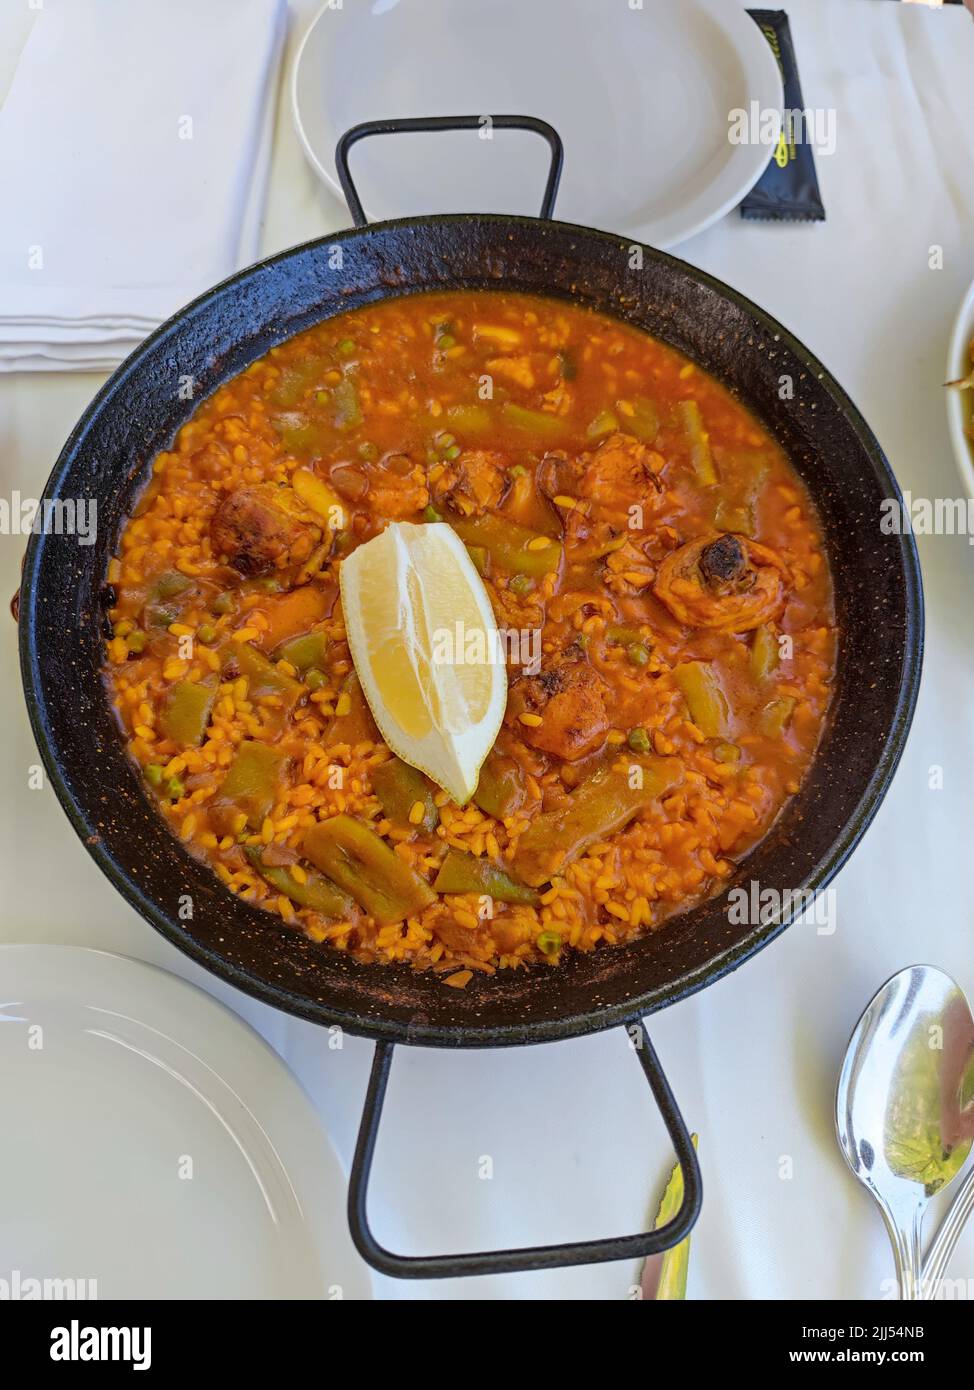 Delicious paella pan with vegetables, meat and a lemon on top served in a restaurant Stock Photo